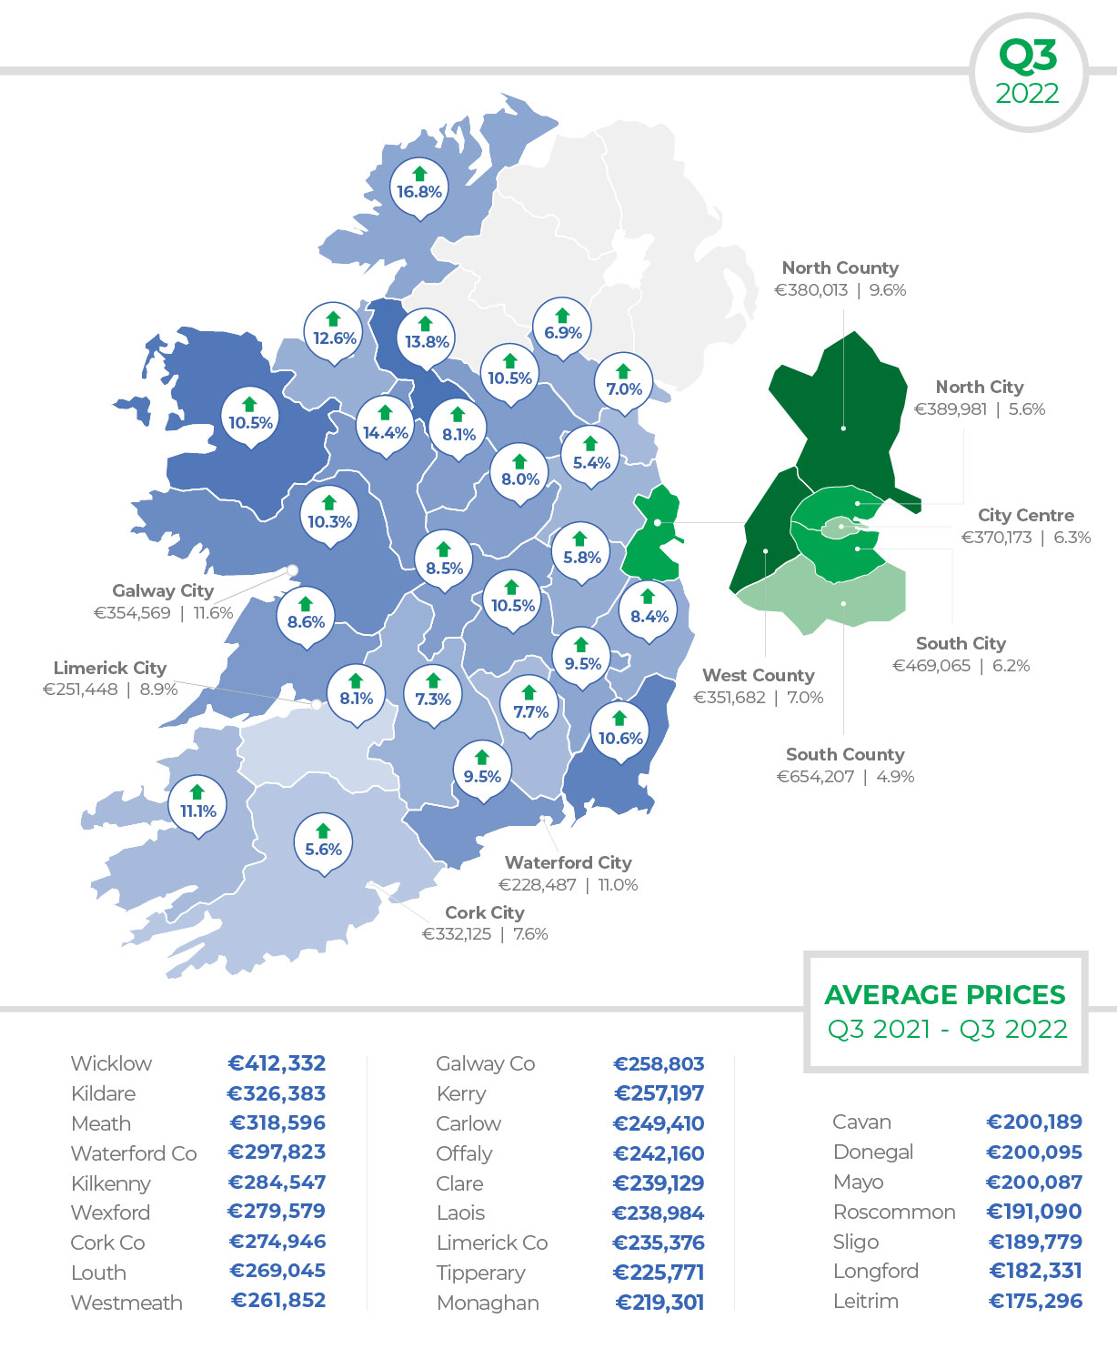 House prices year-on-year change. Image: Daft